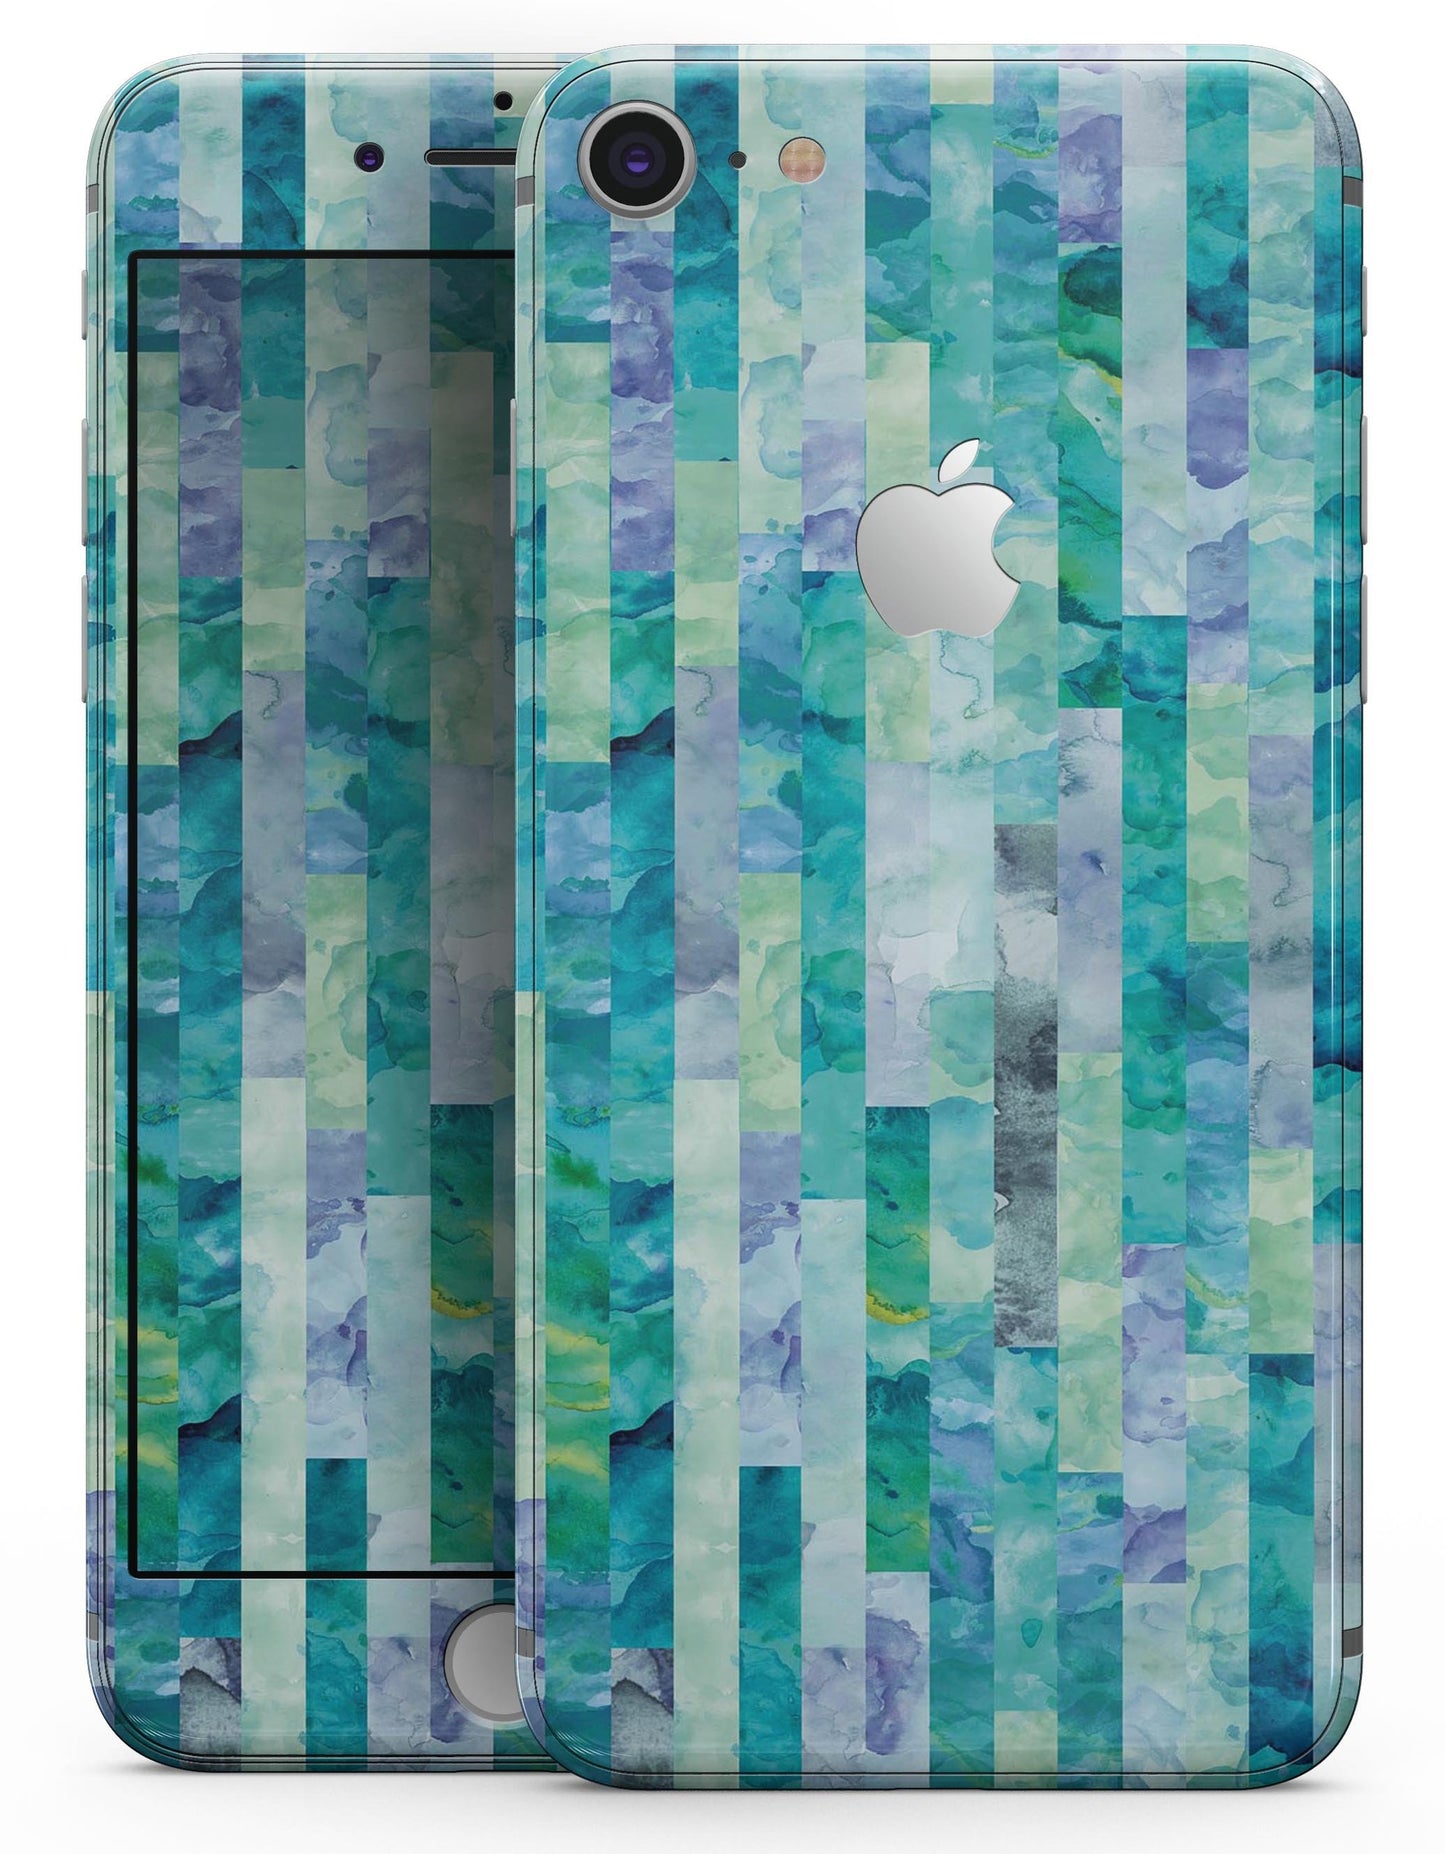 Aqua Watercolor Patchwork - Skin-kit for the iPhone 8 or 8 Plus